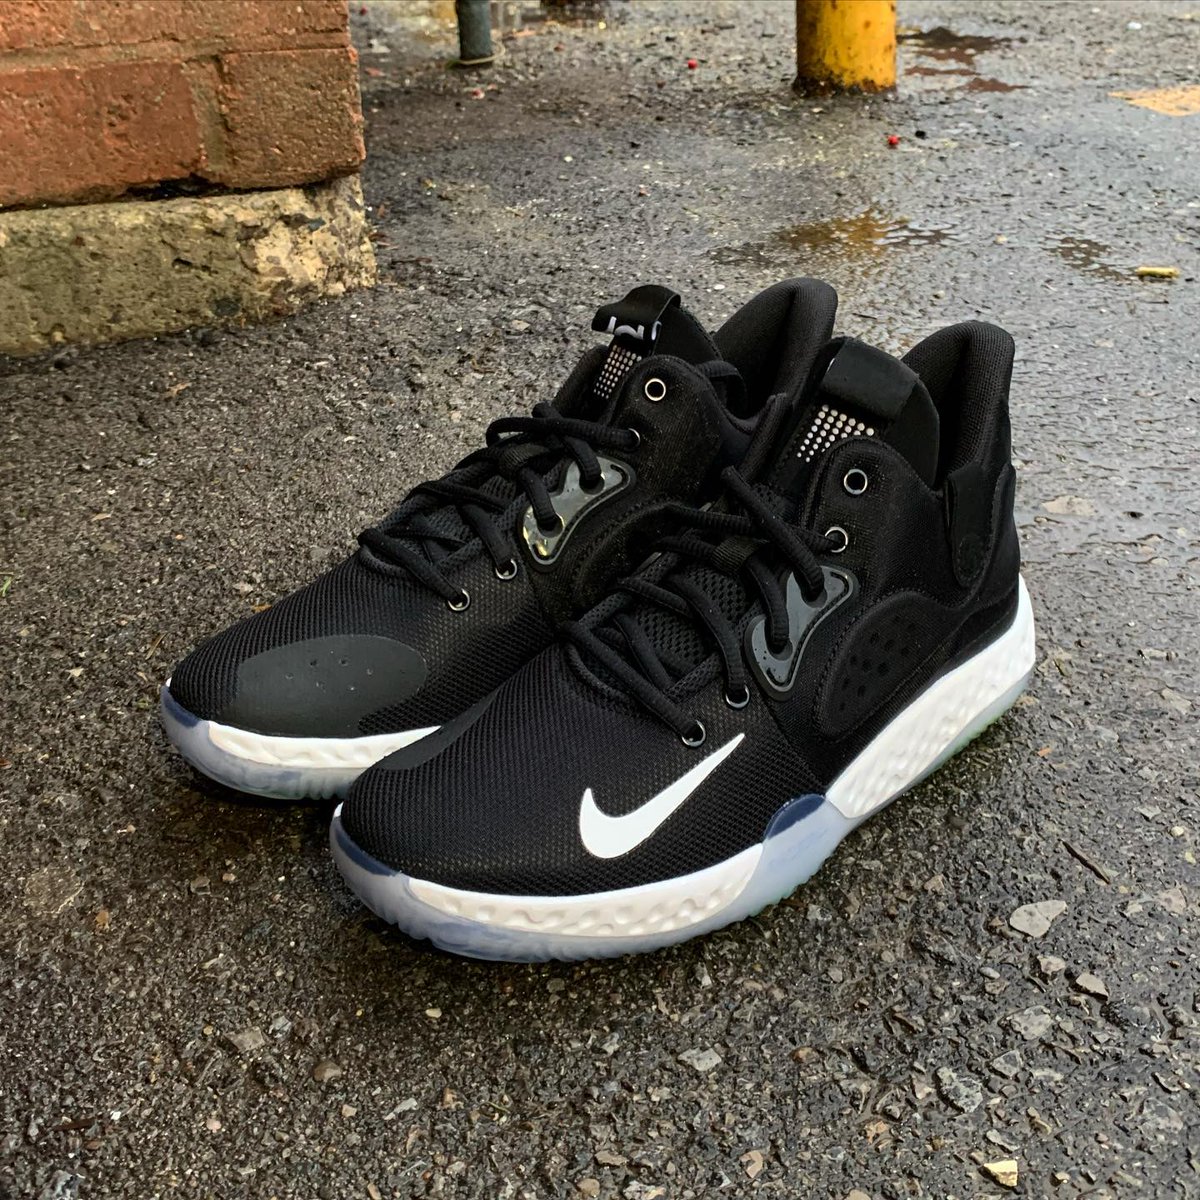 garaje baño no relacionado The Closet Inc. on Twitter: "Spring 2020 Collection Nike KD Trey 5 VII  “Black/White/Cool Grey” Men's Sizes (AT1200-001) 120.00 CAD Available now  in all store locations and online at https://t.co/VX72vYdwcS #TheClosetInc  #TheClosetIncLondon #